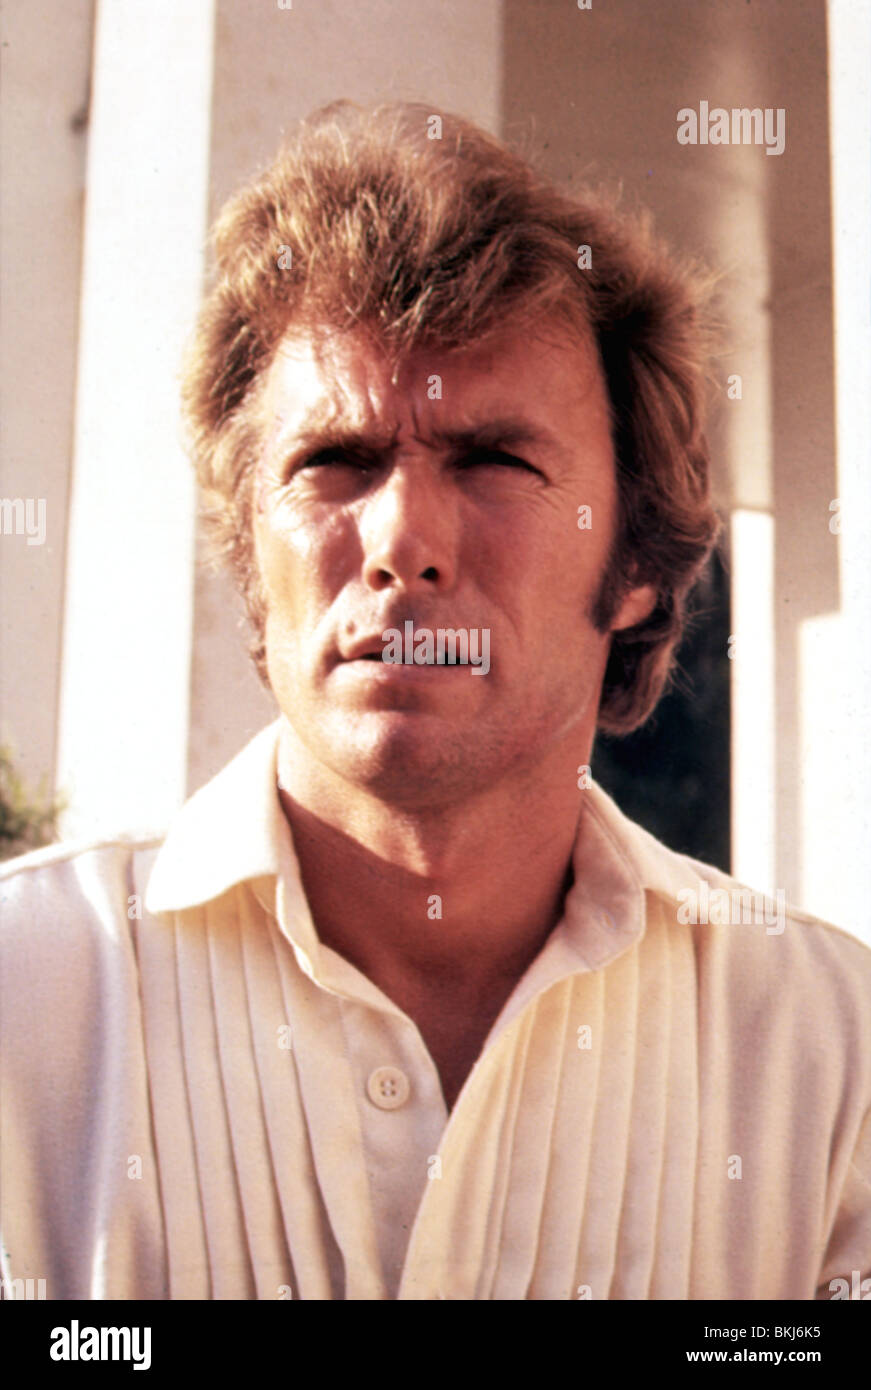 THE BEGUILED (1971) CLINT EASTWOOD BEGL 018 Stock Photo